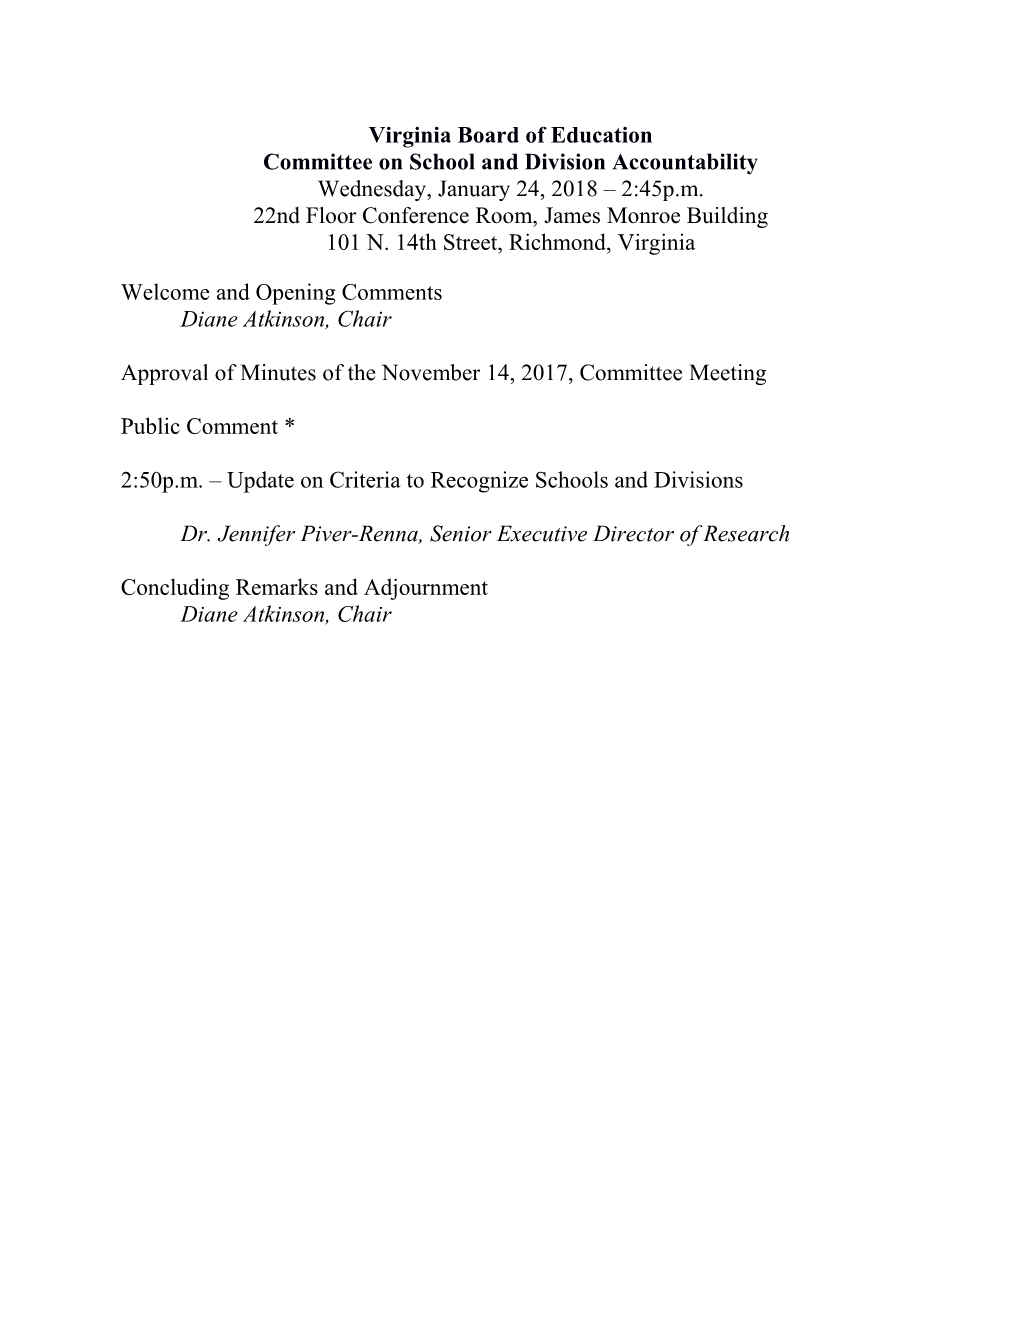 Committee on School and Division Accountability